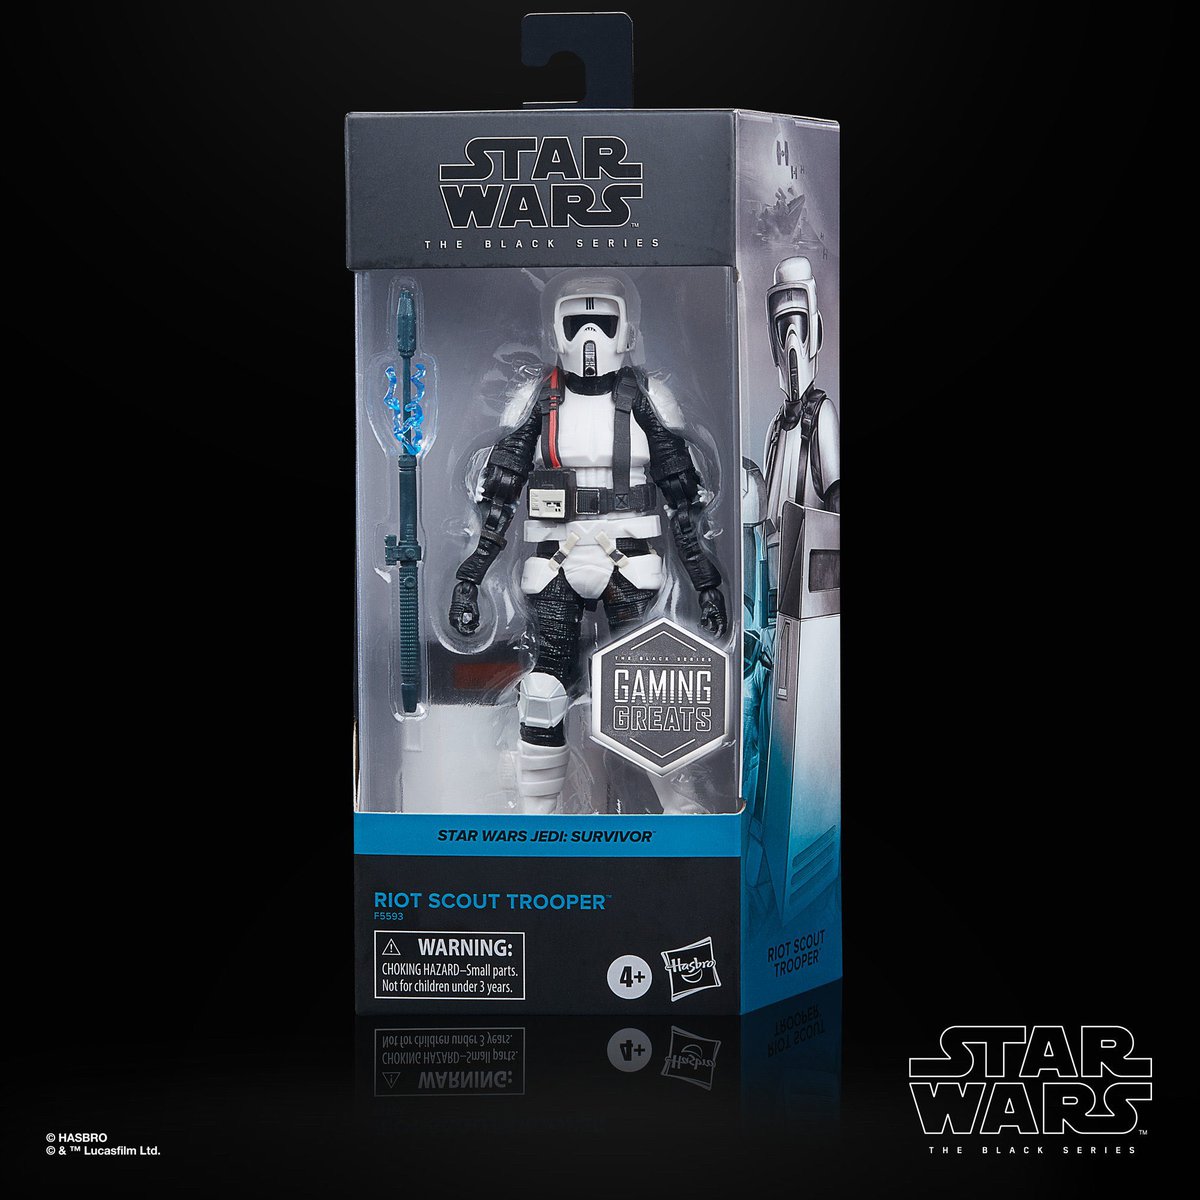 GameStop exclusive The Black Series - Gaming Greats, Riot Scout Trooper preorder

➡️ bit.ly/3PV3Fxf

#ad #StarWars #TheBlackSeries #RiotScoutTrooper